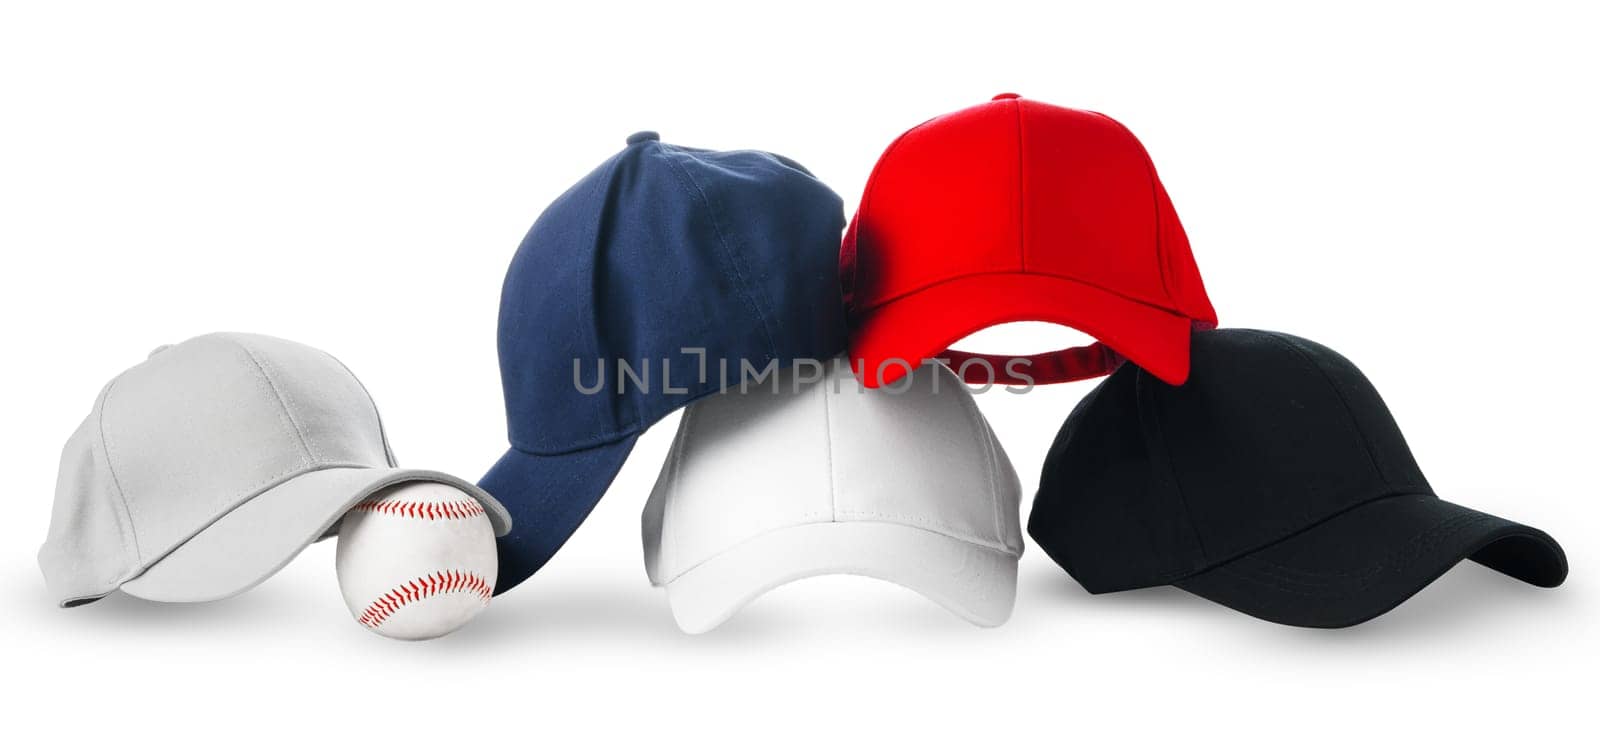 Colorful Assortment of Baseball Caps and a Ball on White Background by Fabrikasimf